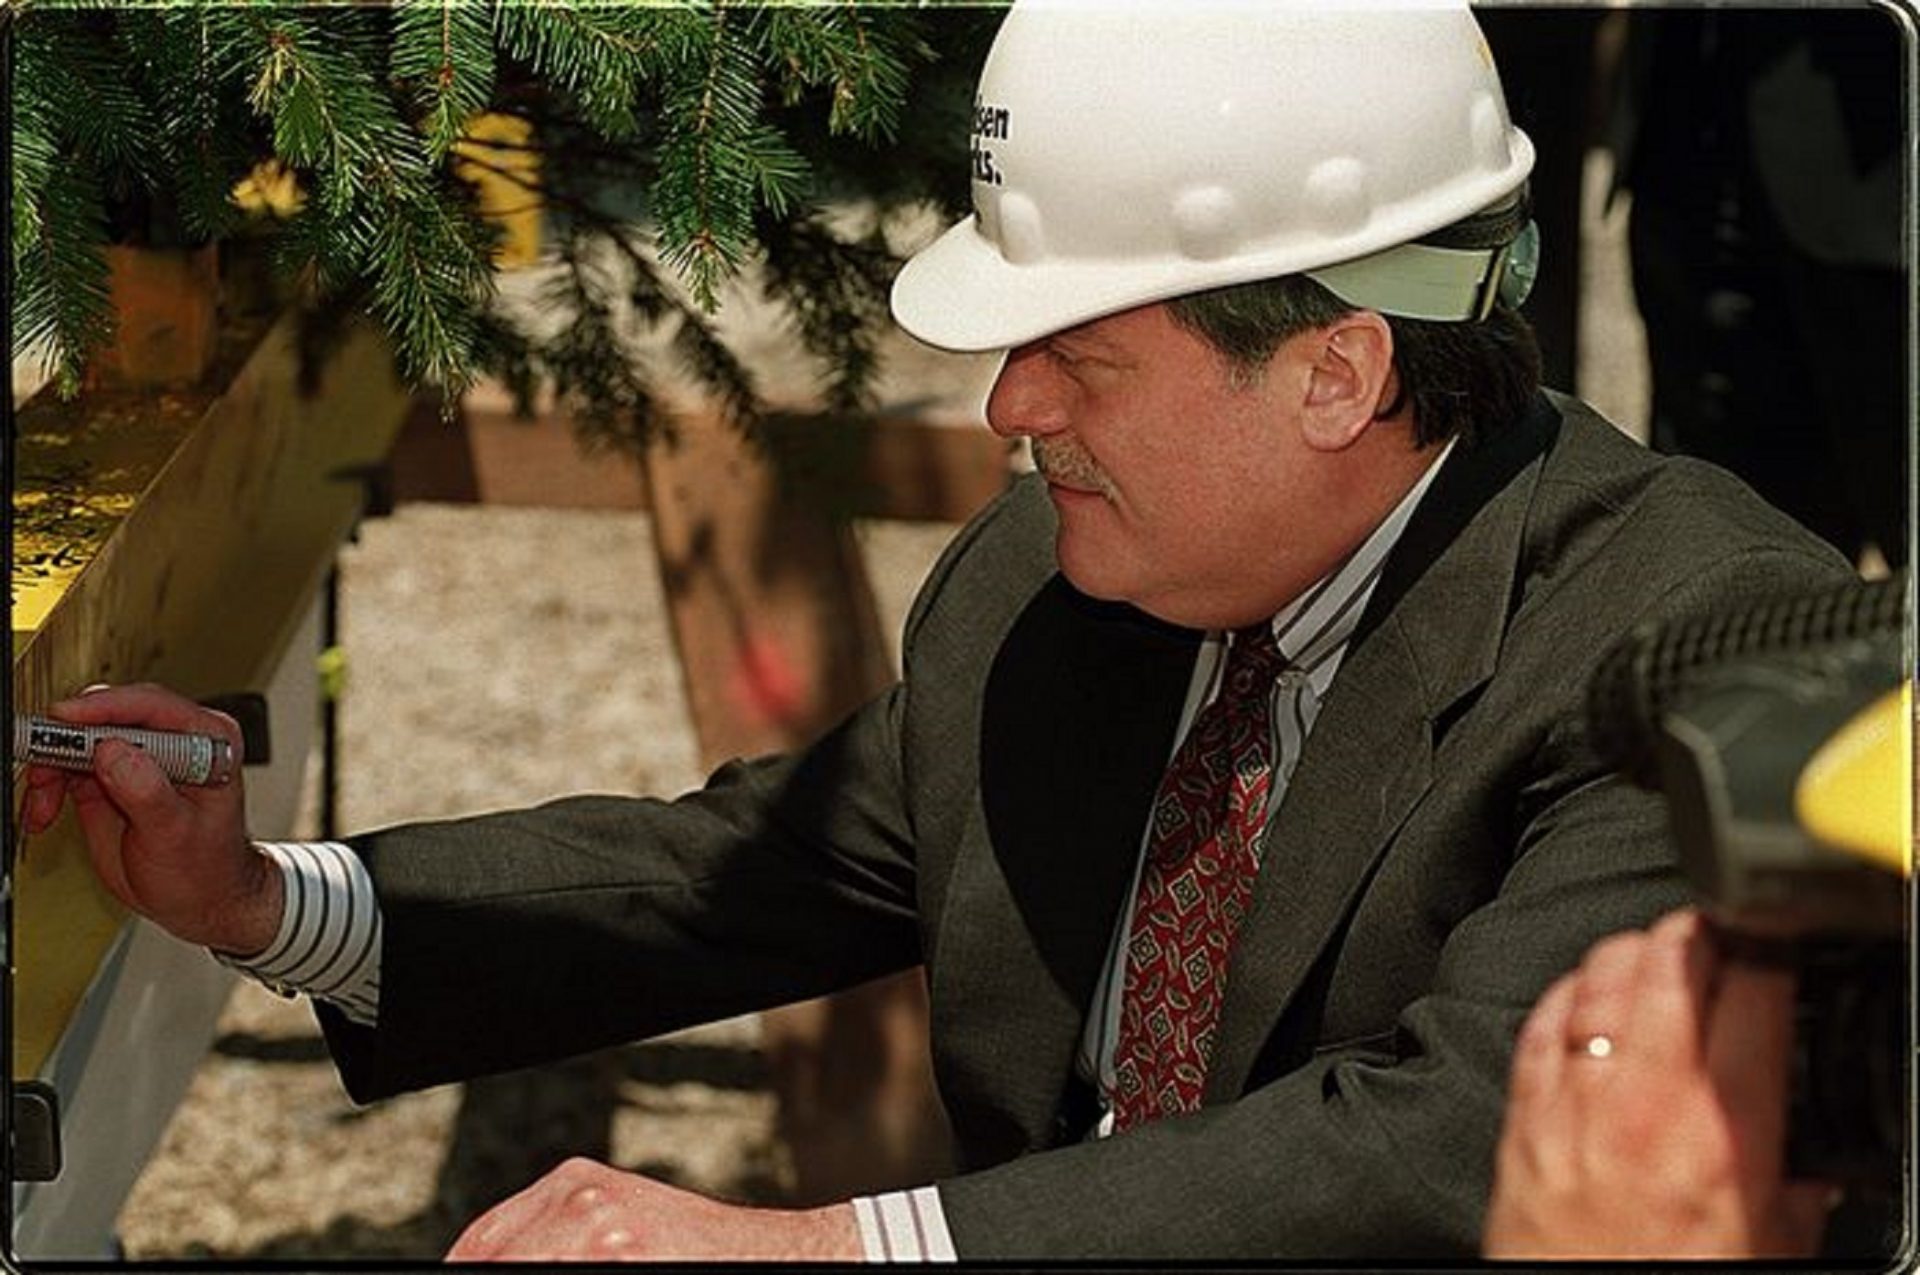 Harrisburg Mayor Stephen R. Reed signs his name on the 10-foot steel beam adorned with flags and an evergreen tree that was hoisted to the top of the Whitaker Center for Science and the Arts. The "topping off" ceremony marked the completion of the building's steel structure, May 15, 1998.